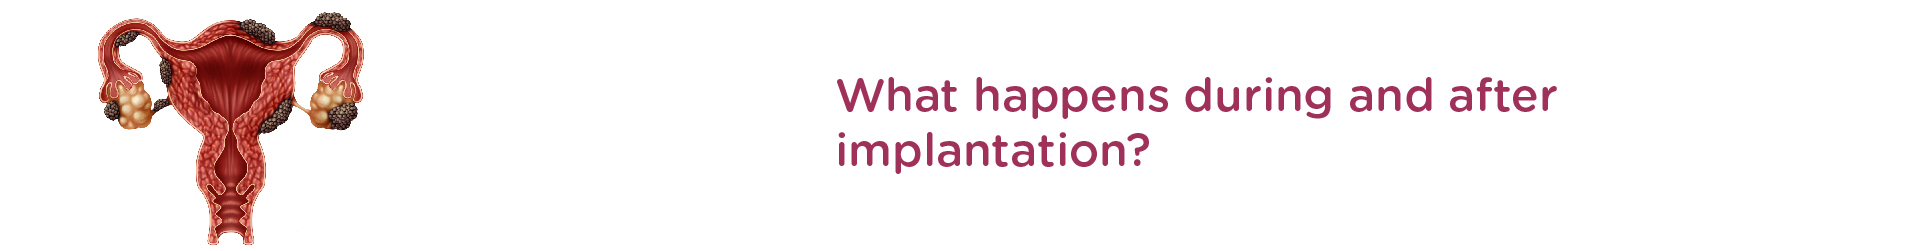 What happens during and after implantation?